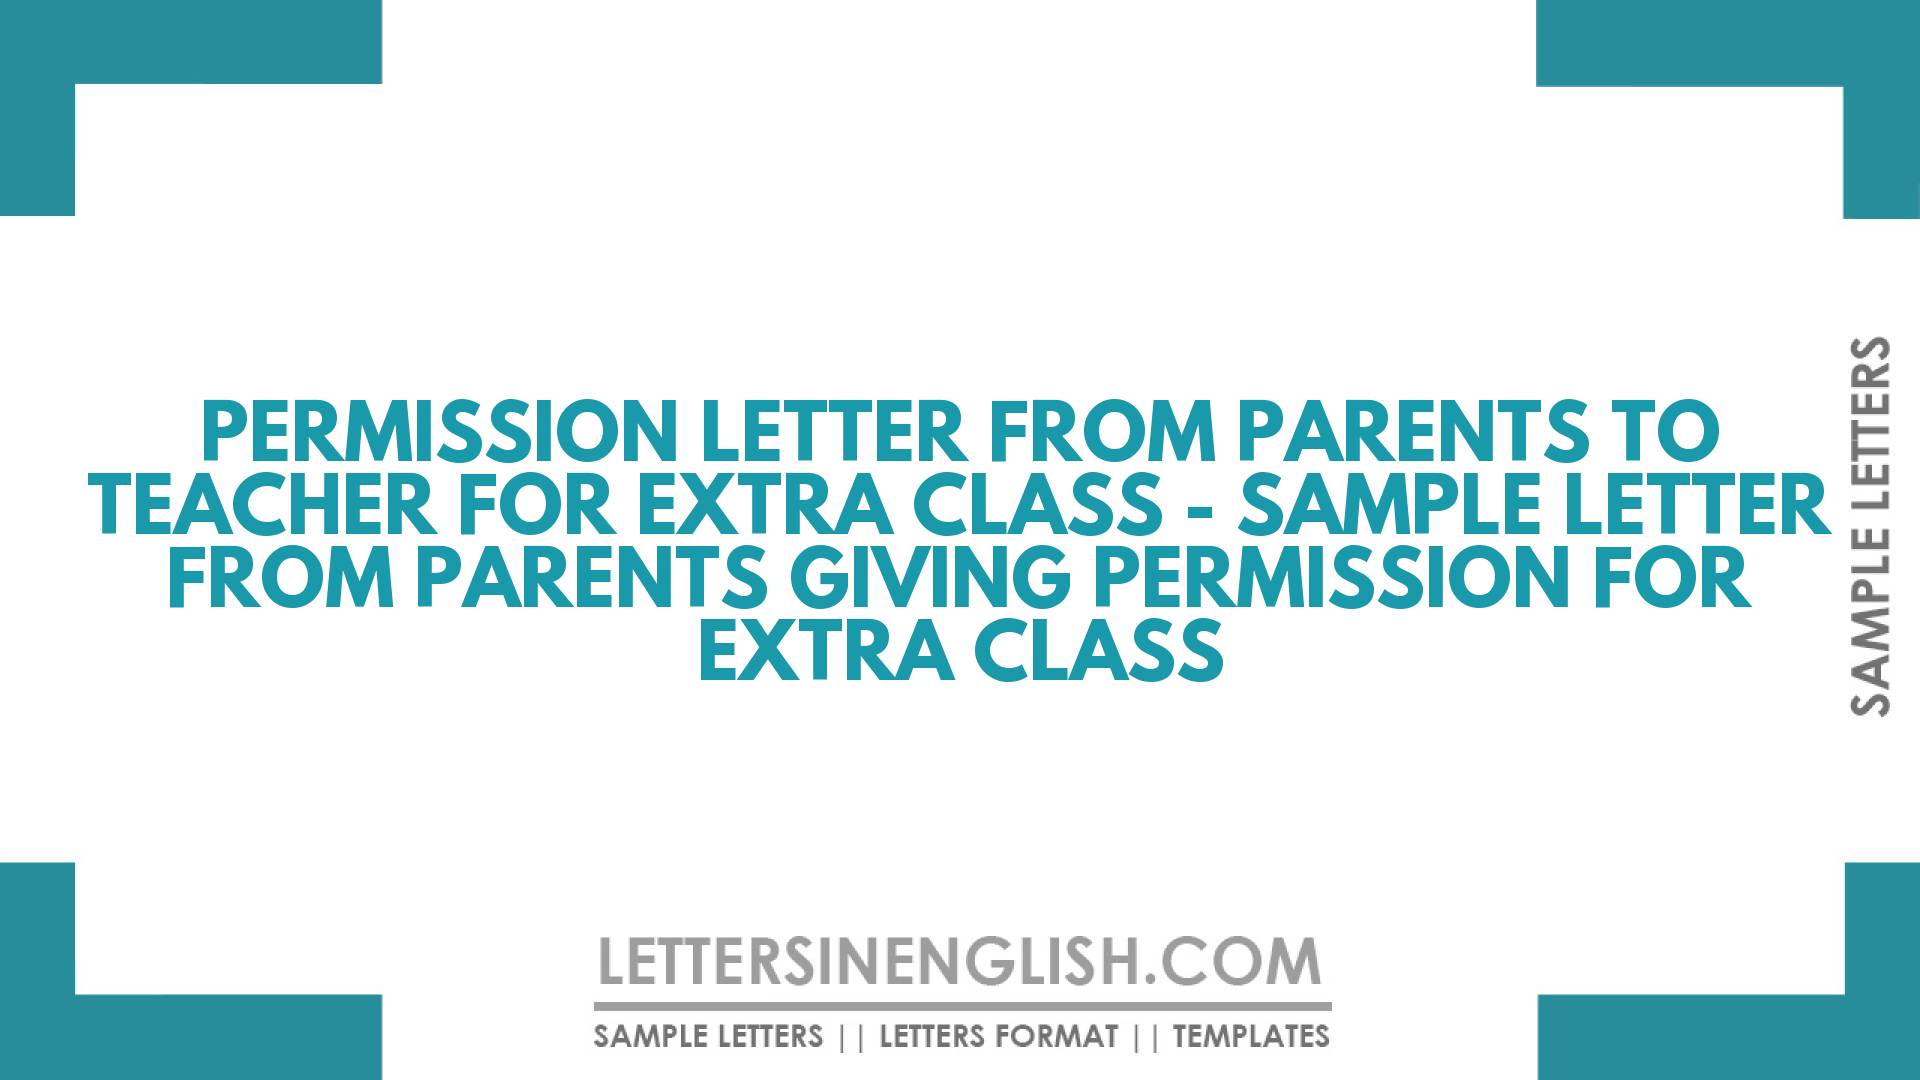 Permission Letter from Parents to Teacher for Extra Class – Sample Letter from Parents Giving Permission for Extra Class